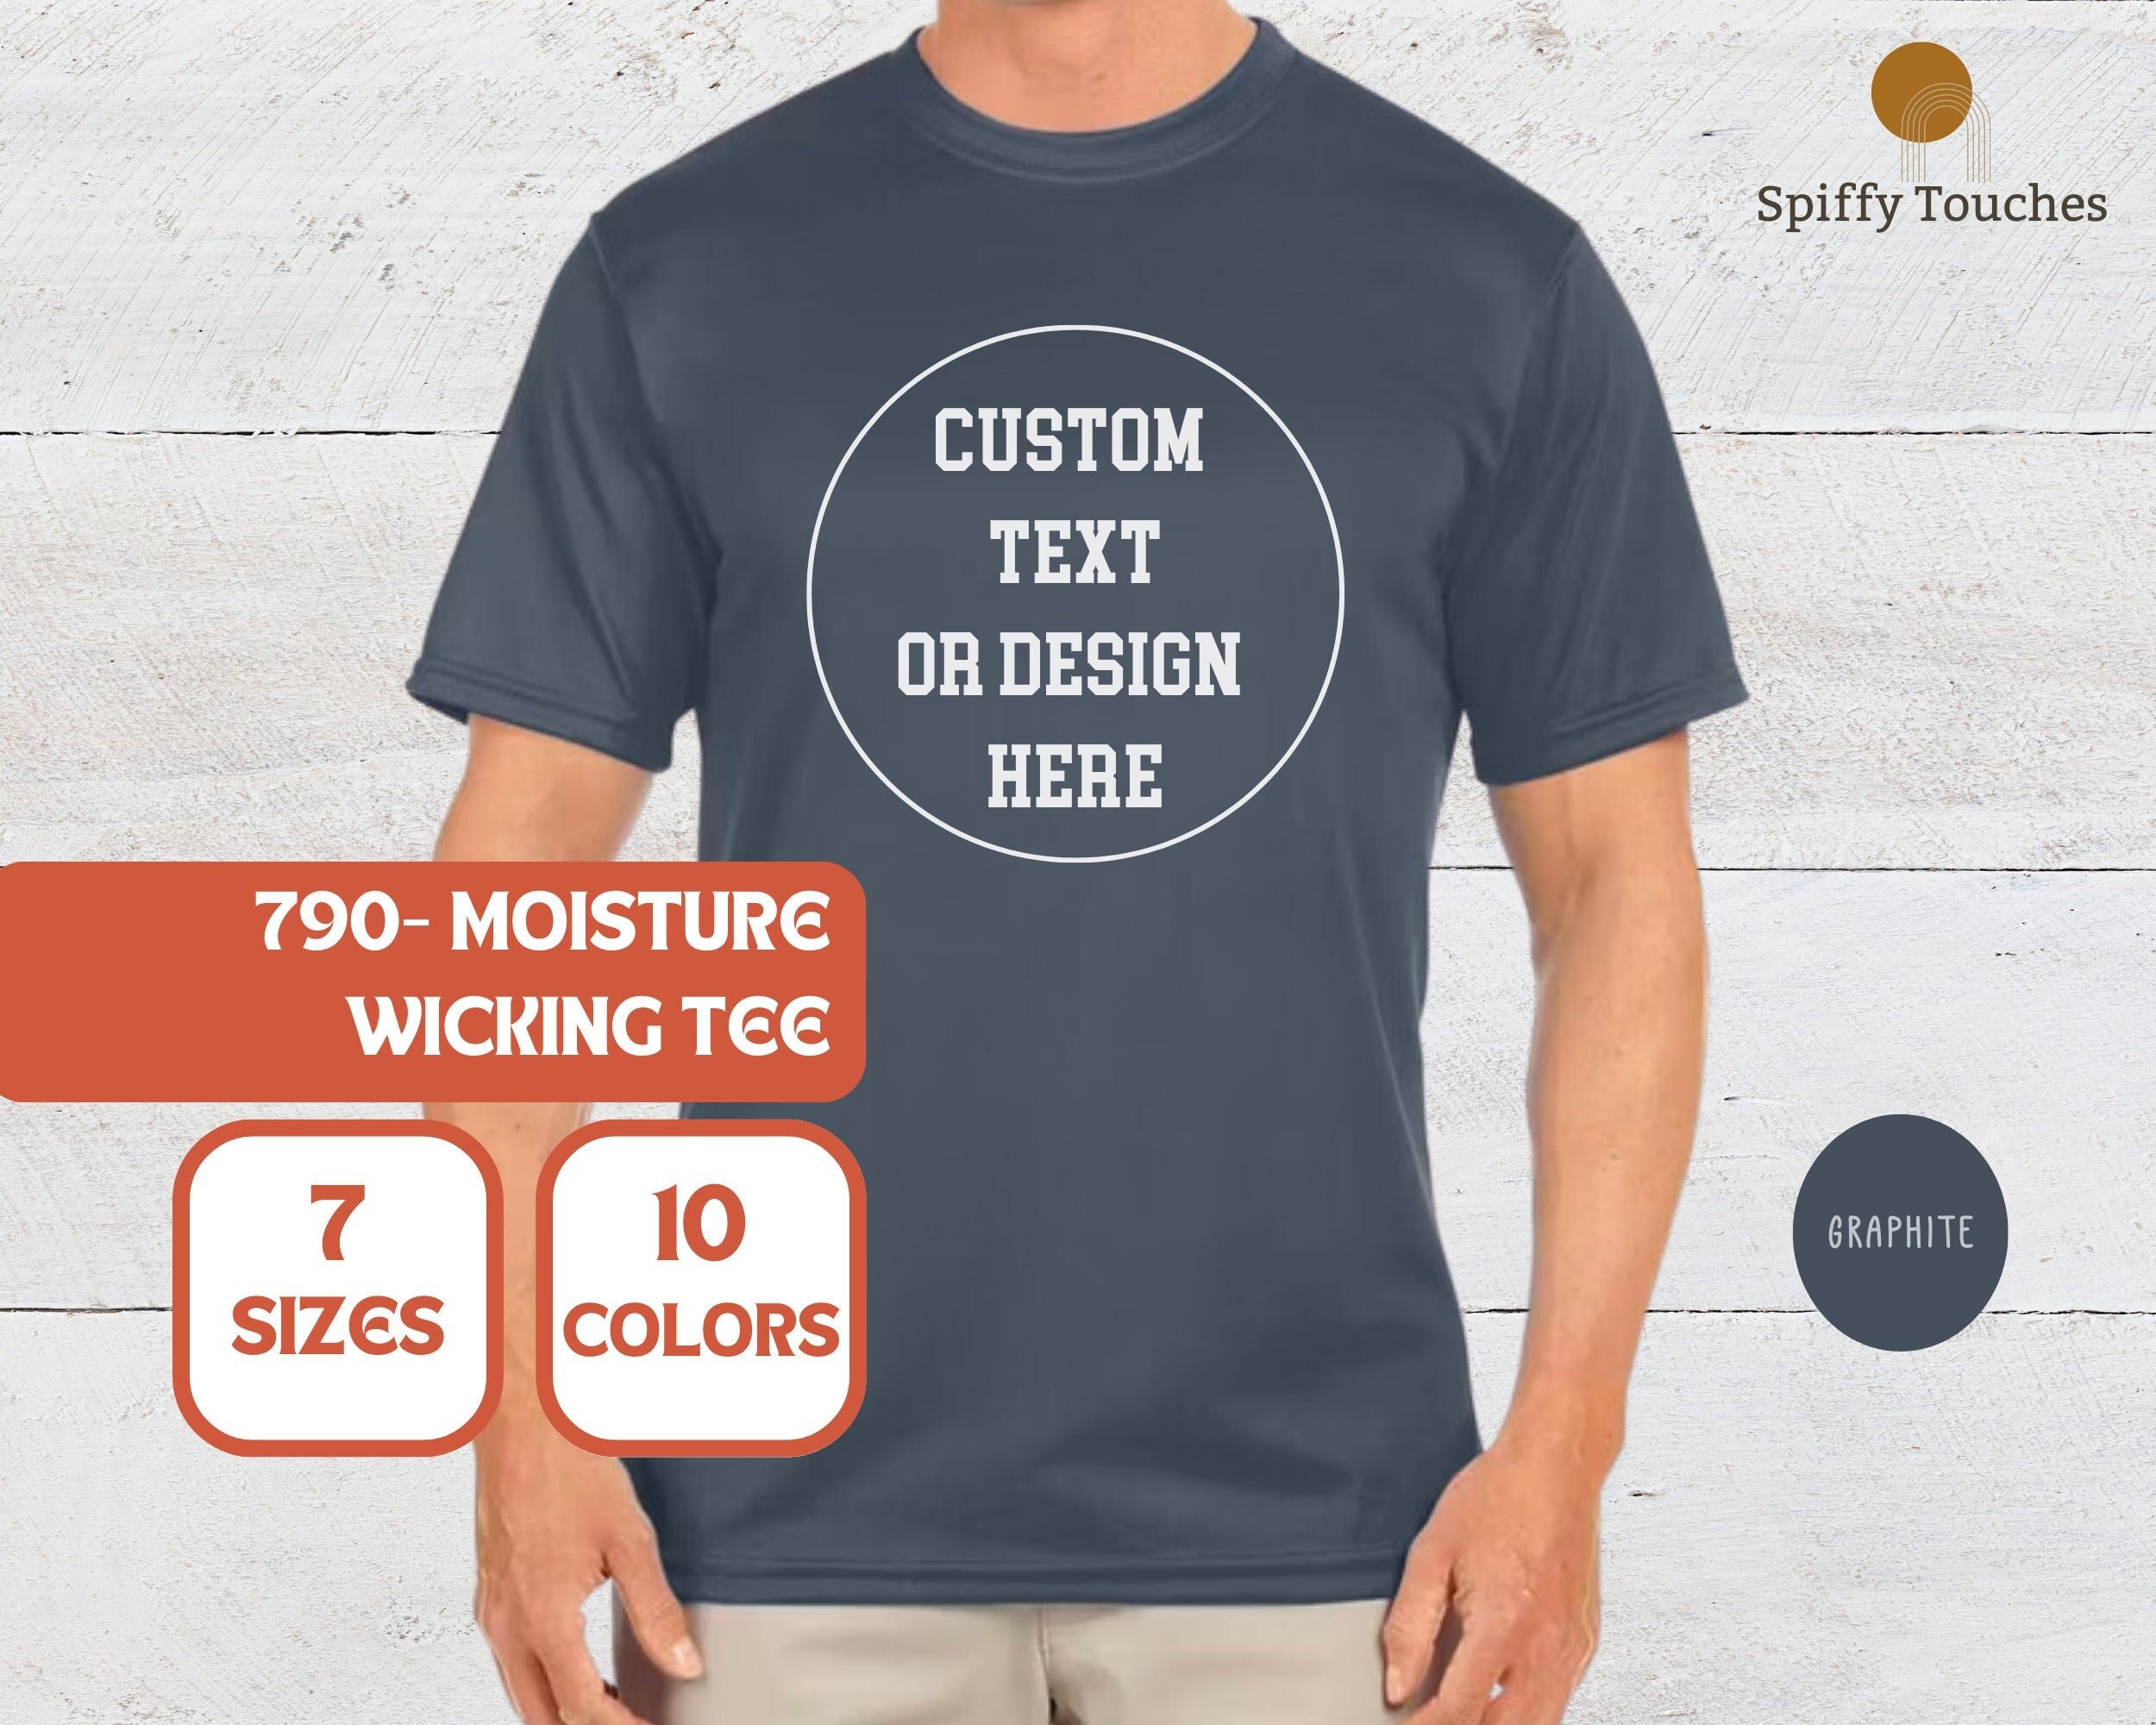 Custom Designed Performance Shirts, T-Shirts and Acc (Full Color